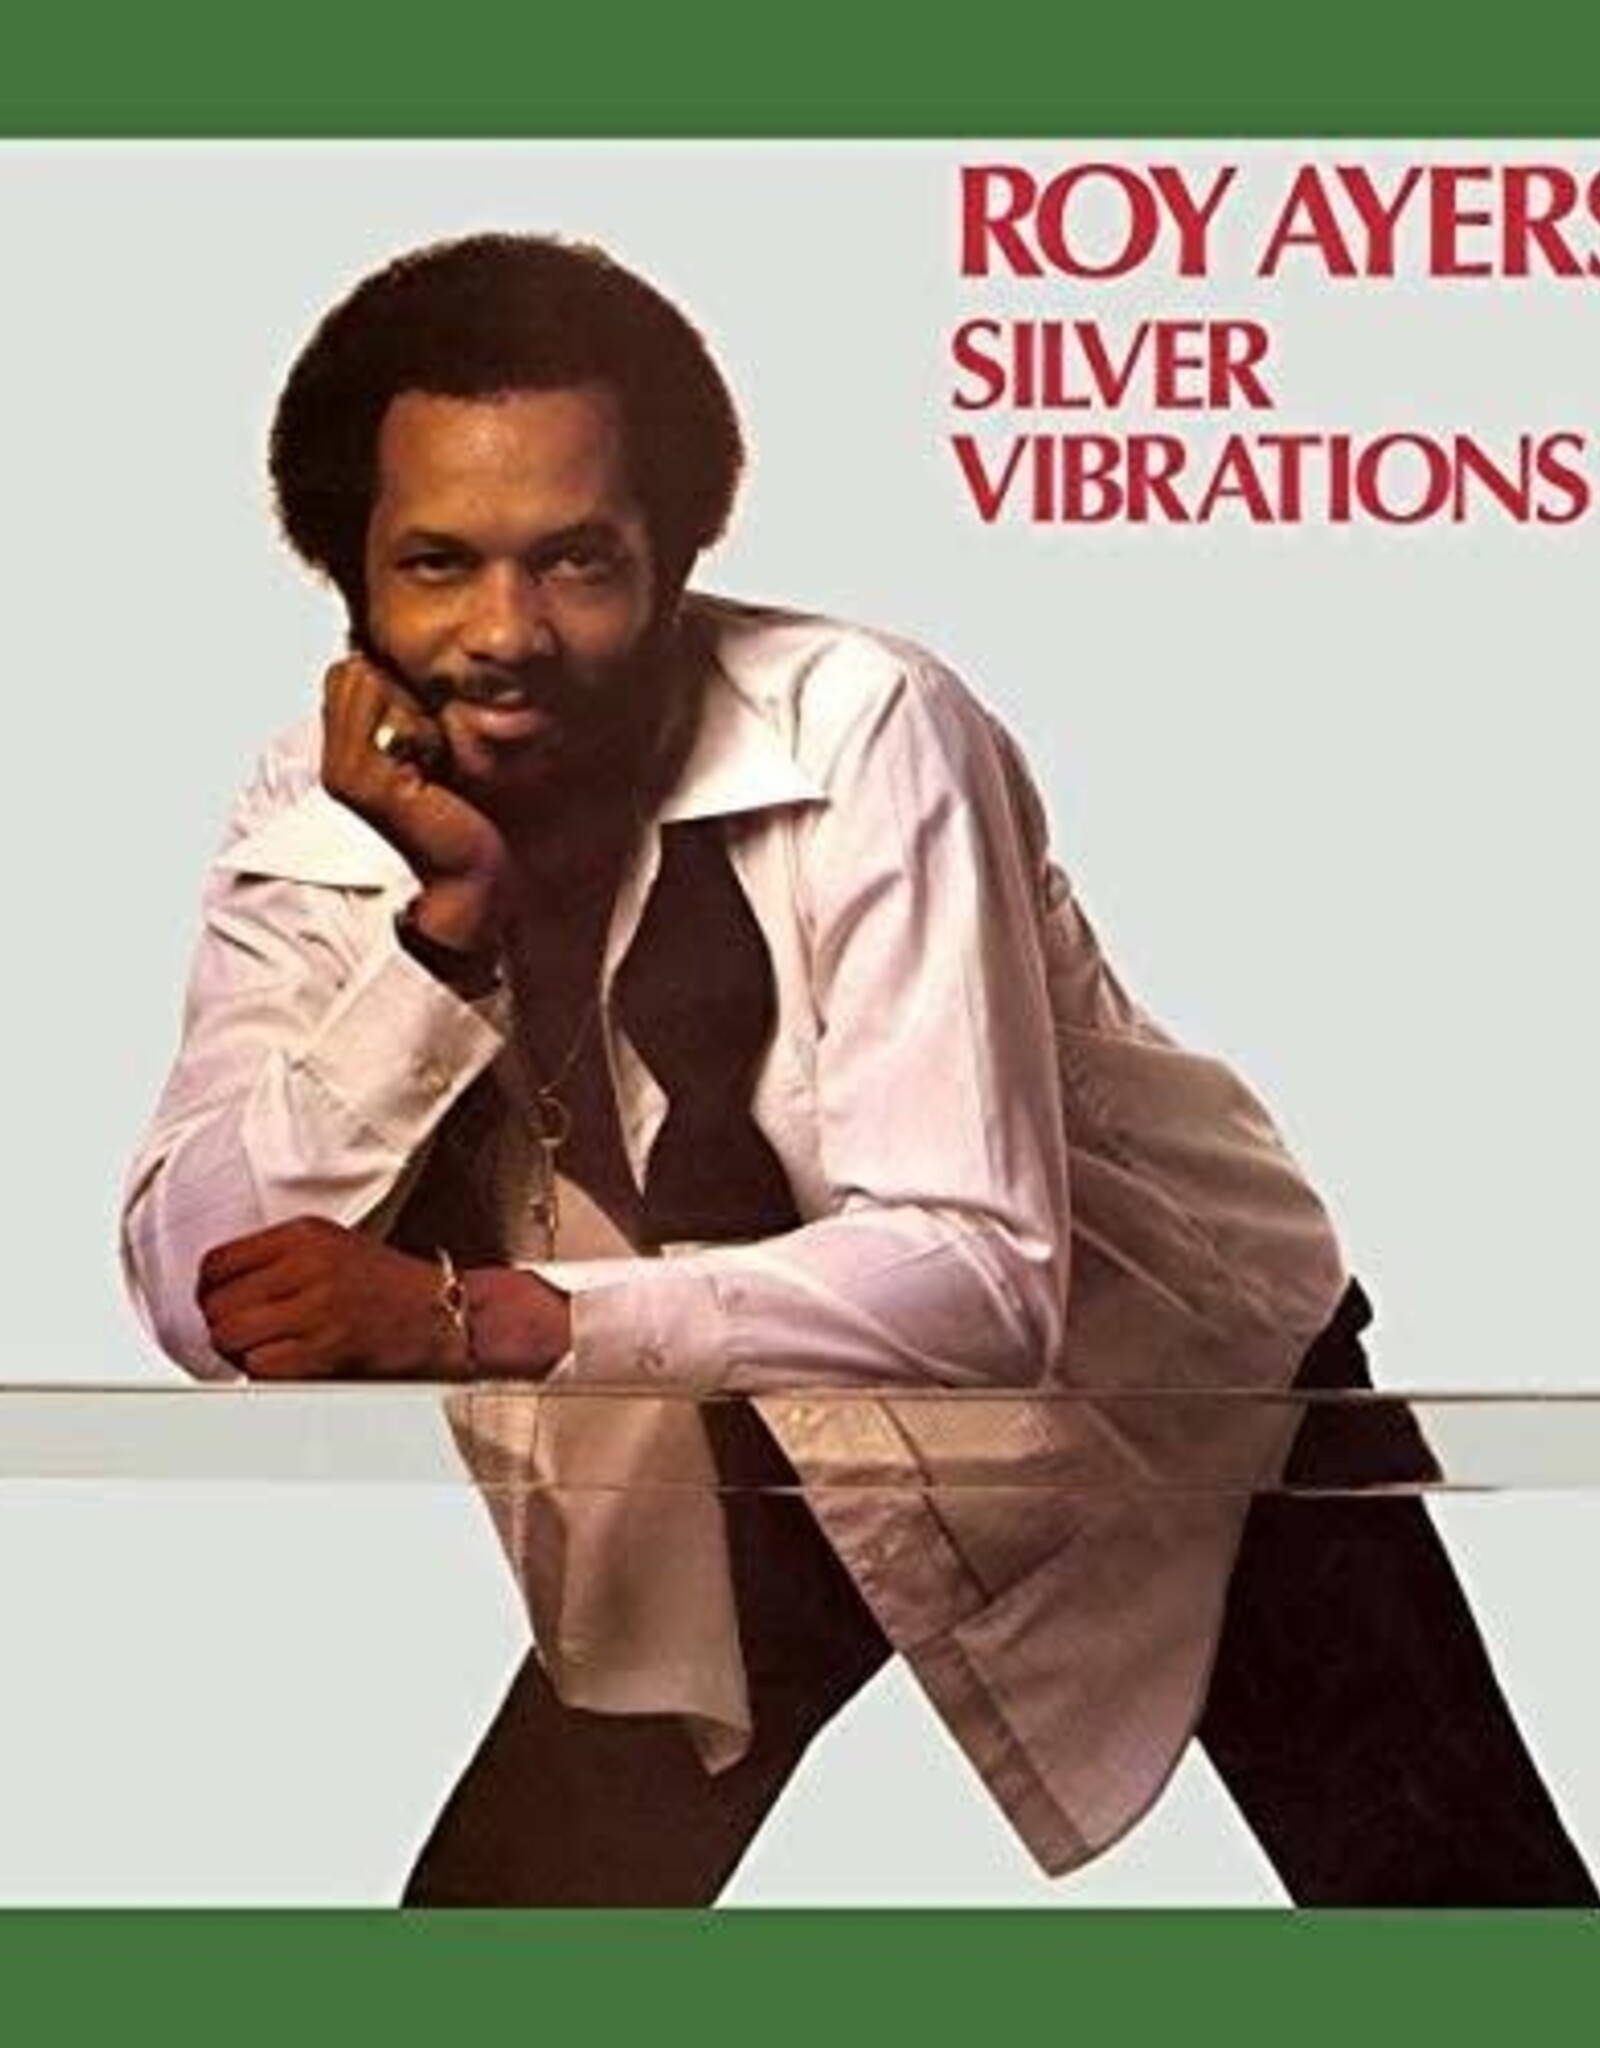 Roy Ayers - Silver Vibrations